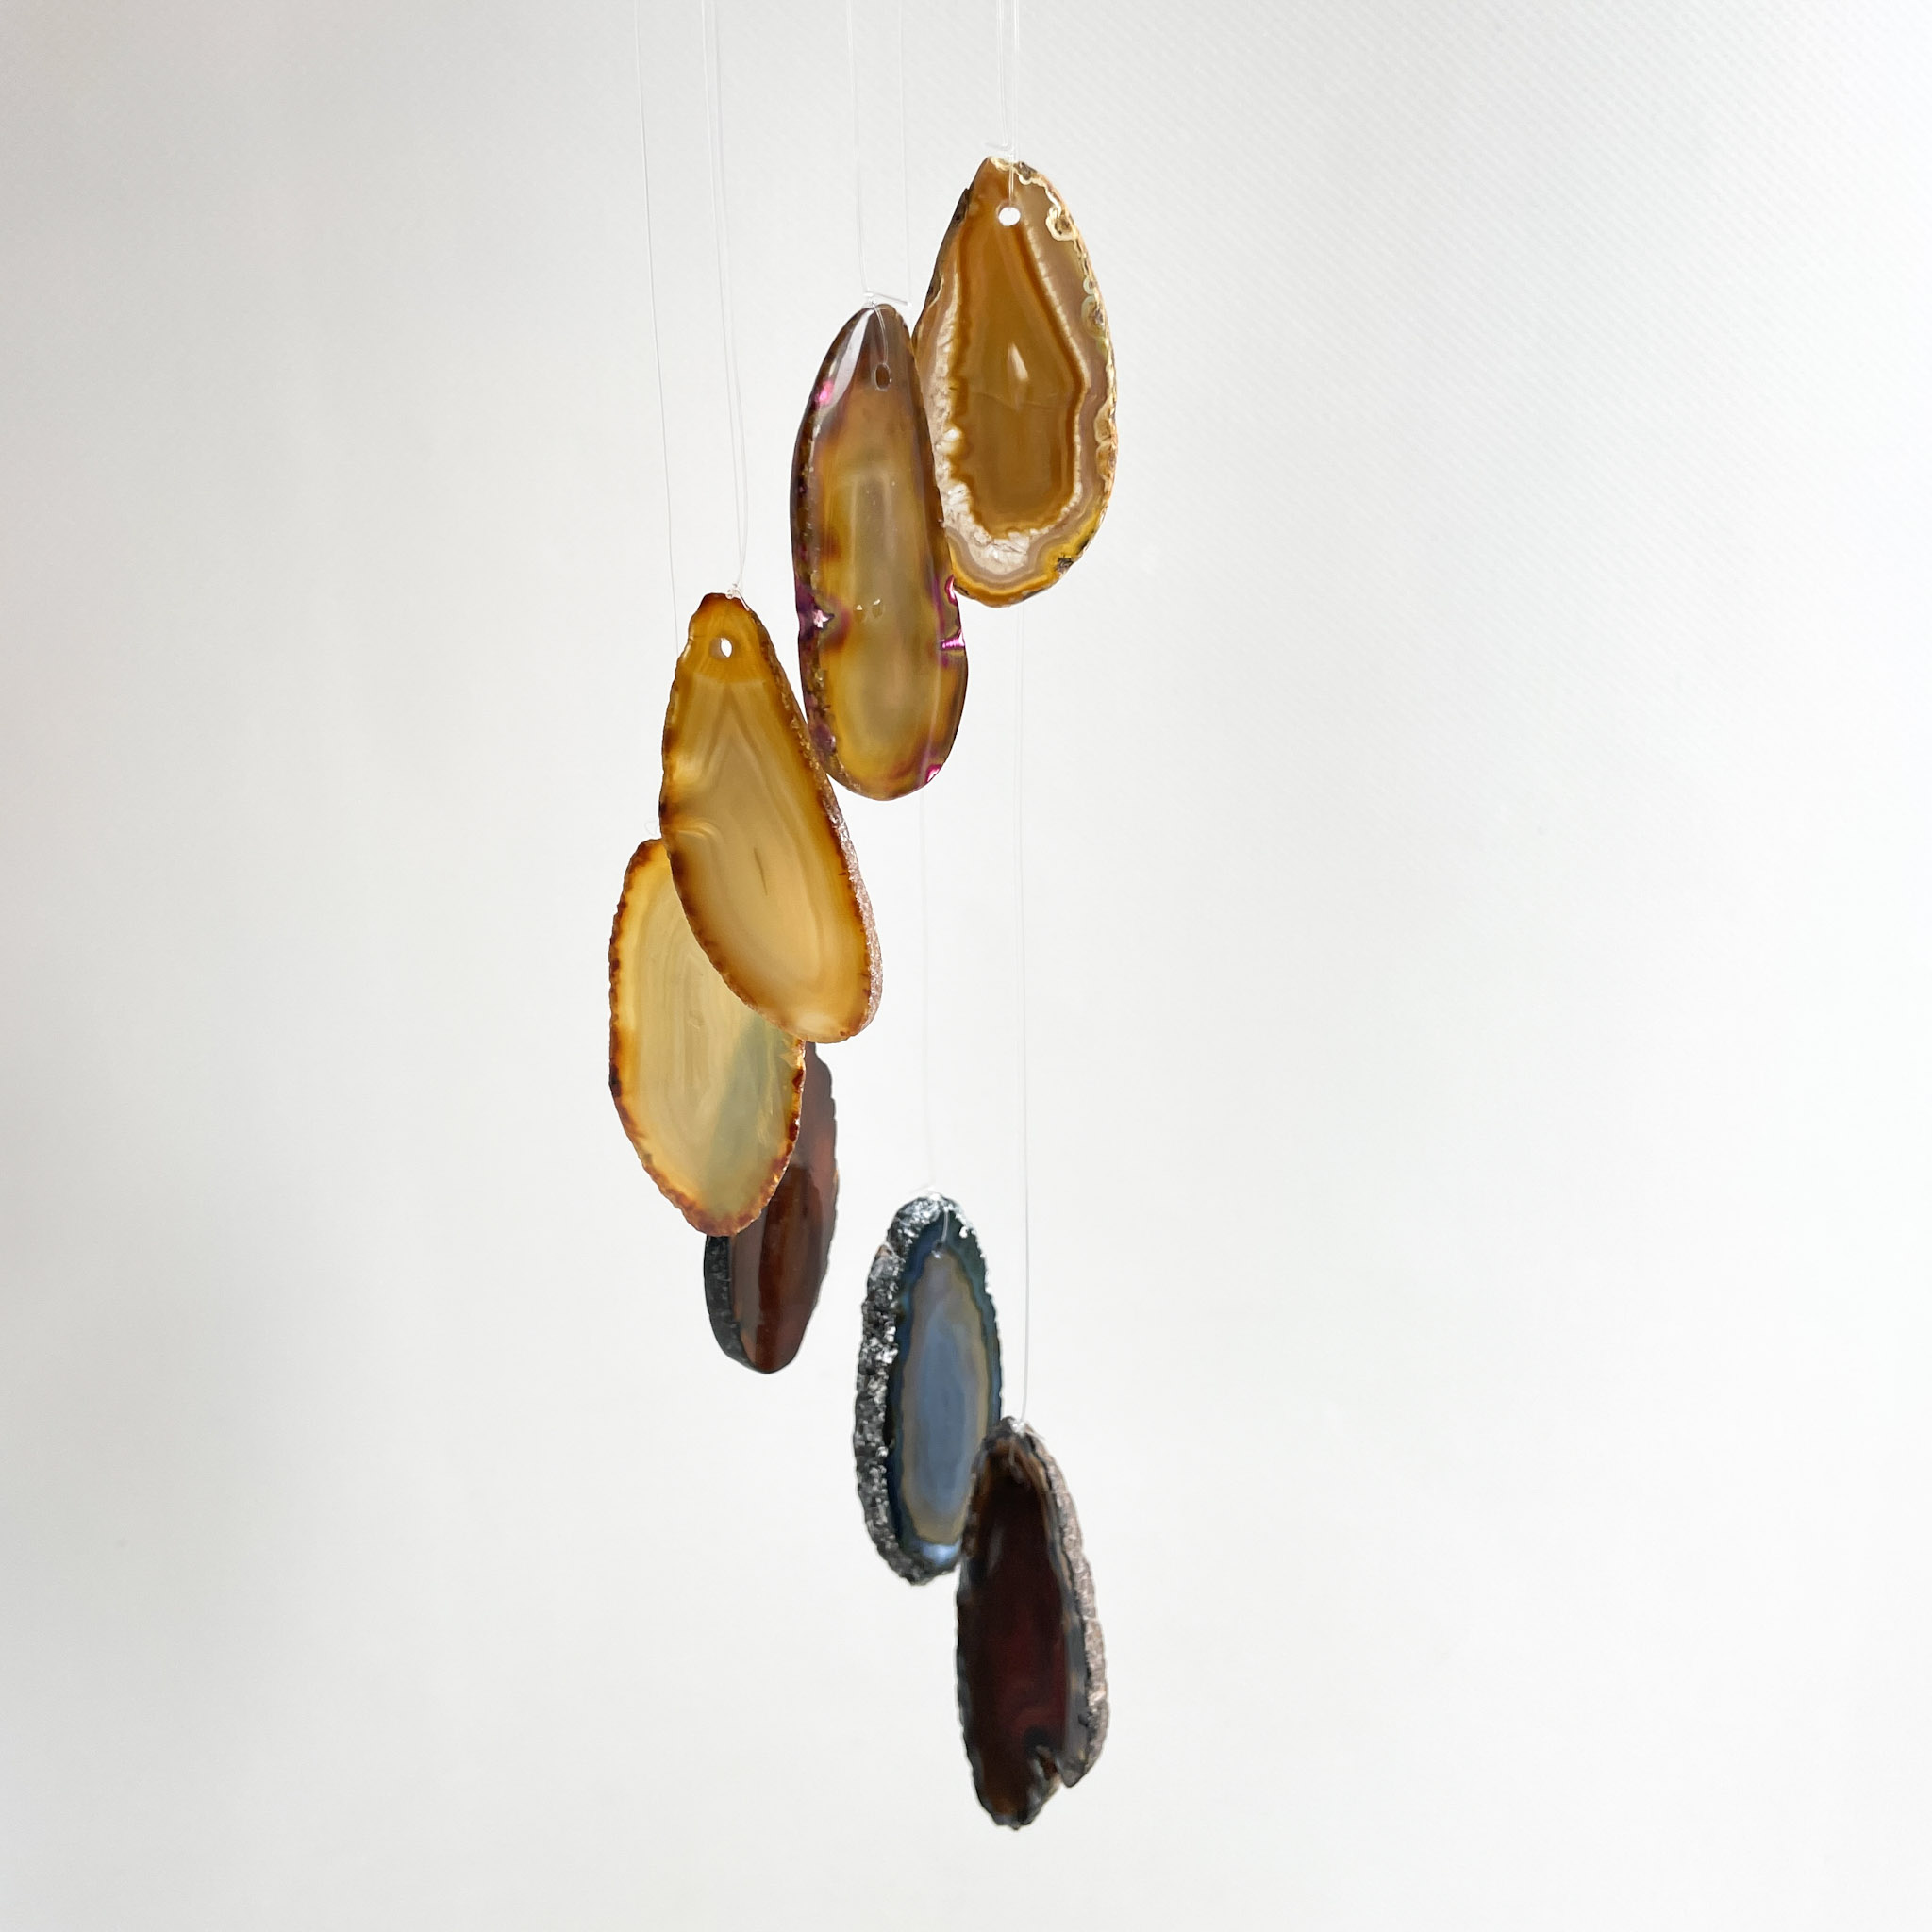 Sliced agate stones hanging by threads against a white background, showing varied colors and natural patterns.